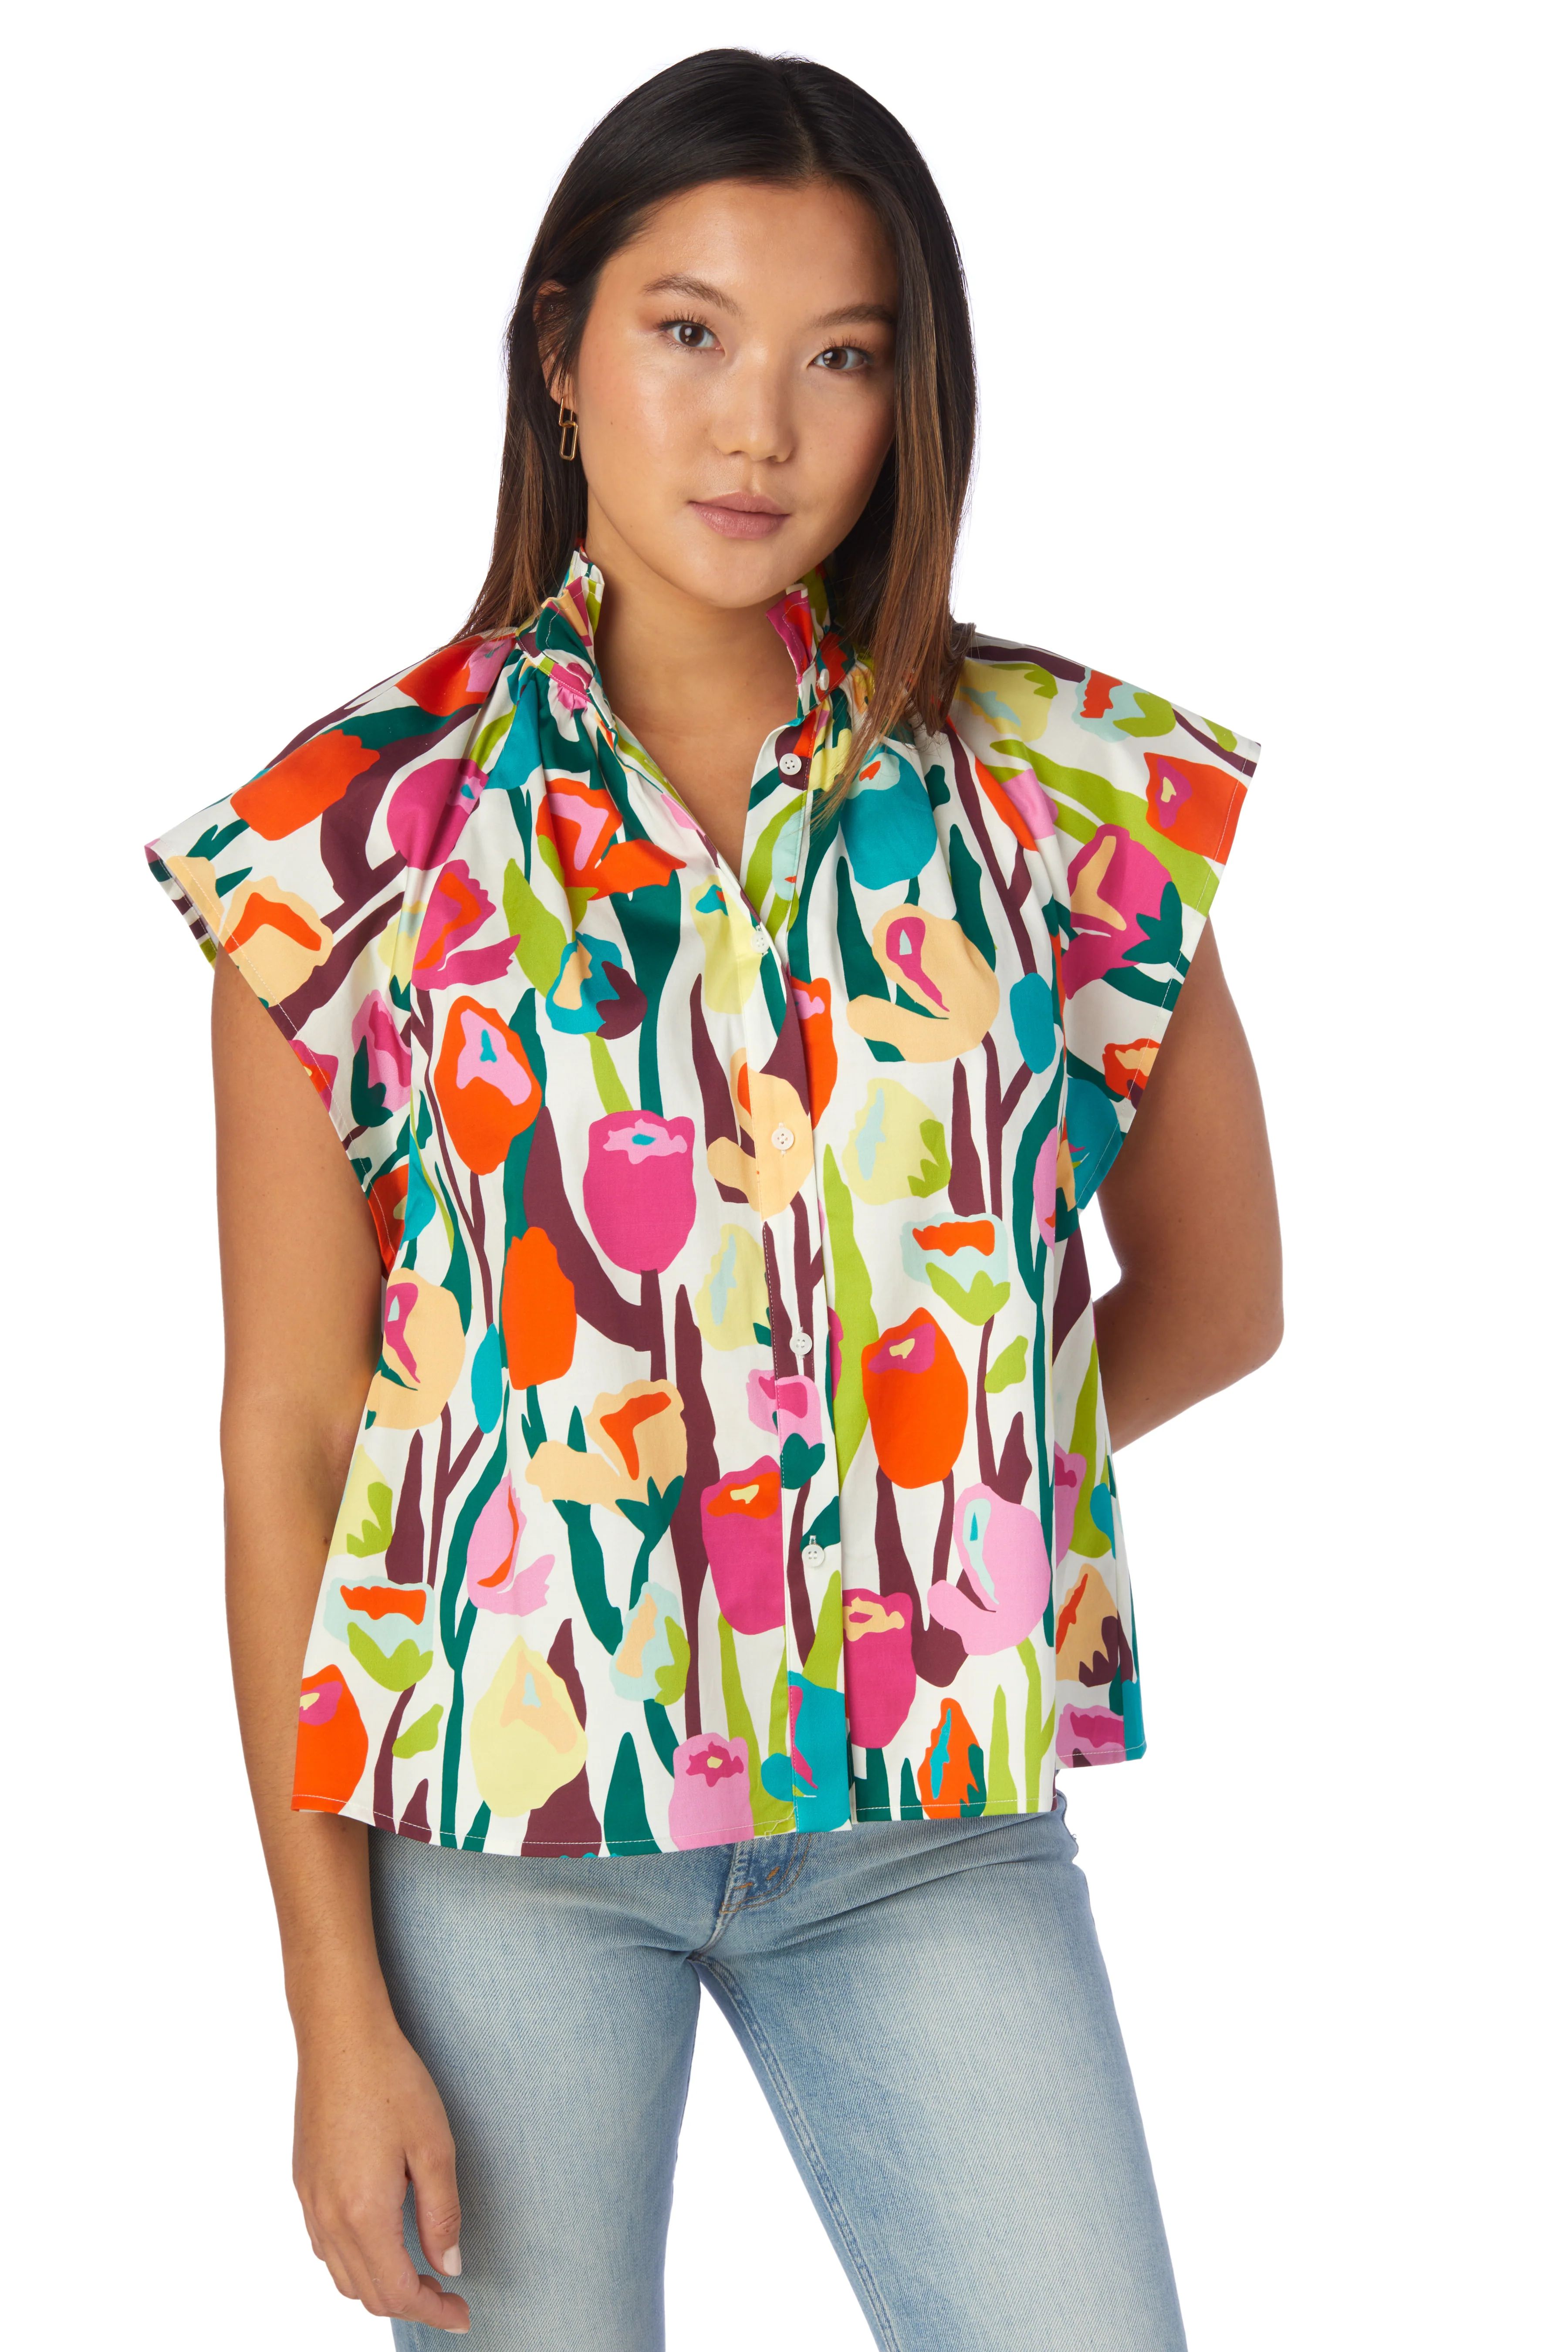 Billie Blouse in Tulip - CROSBY by Mollie Burch | CROSBY by Mollie Burch